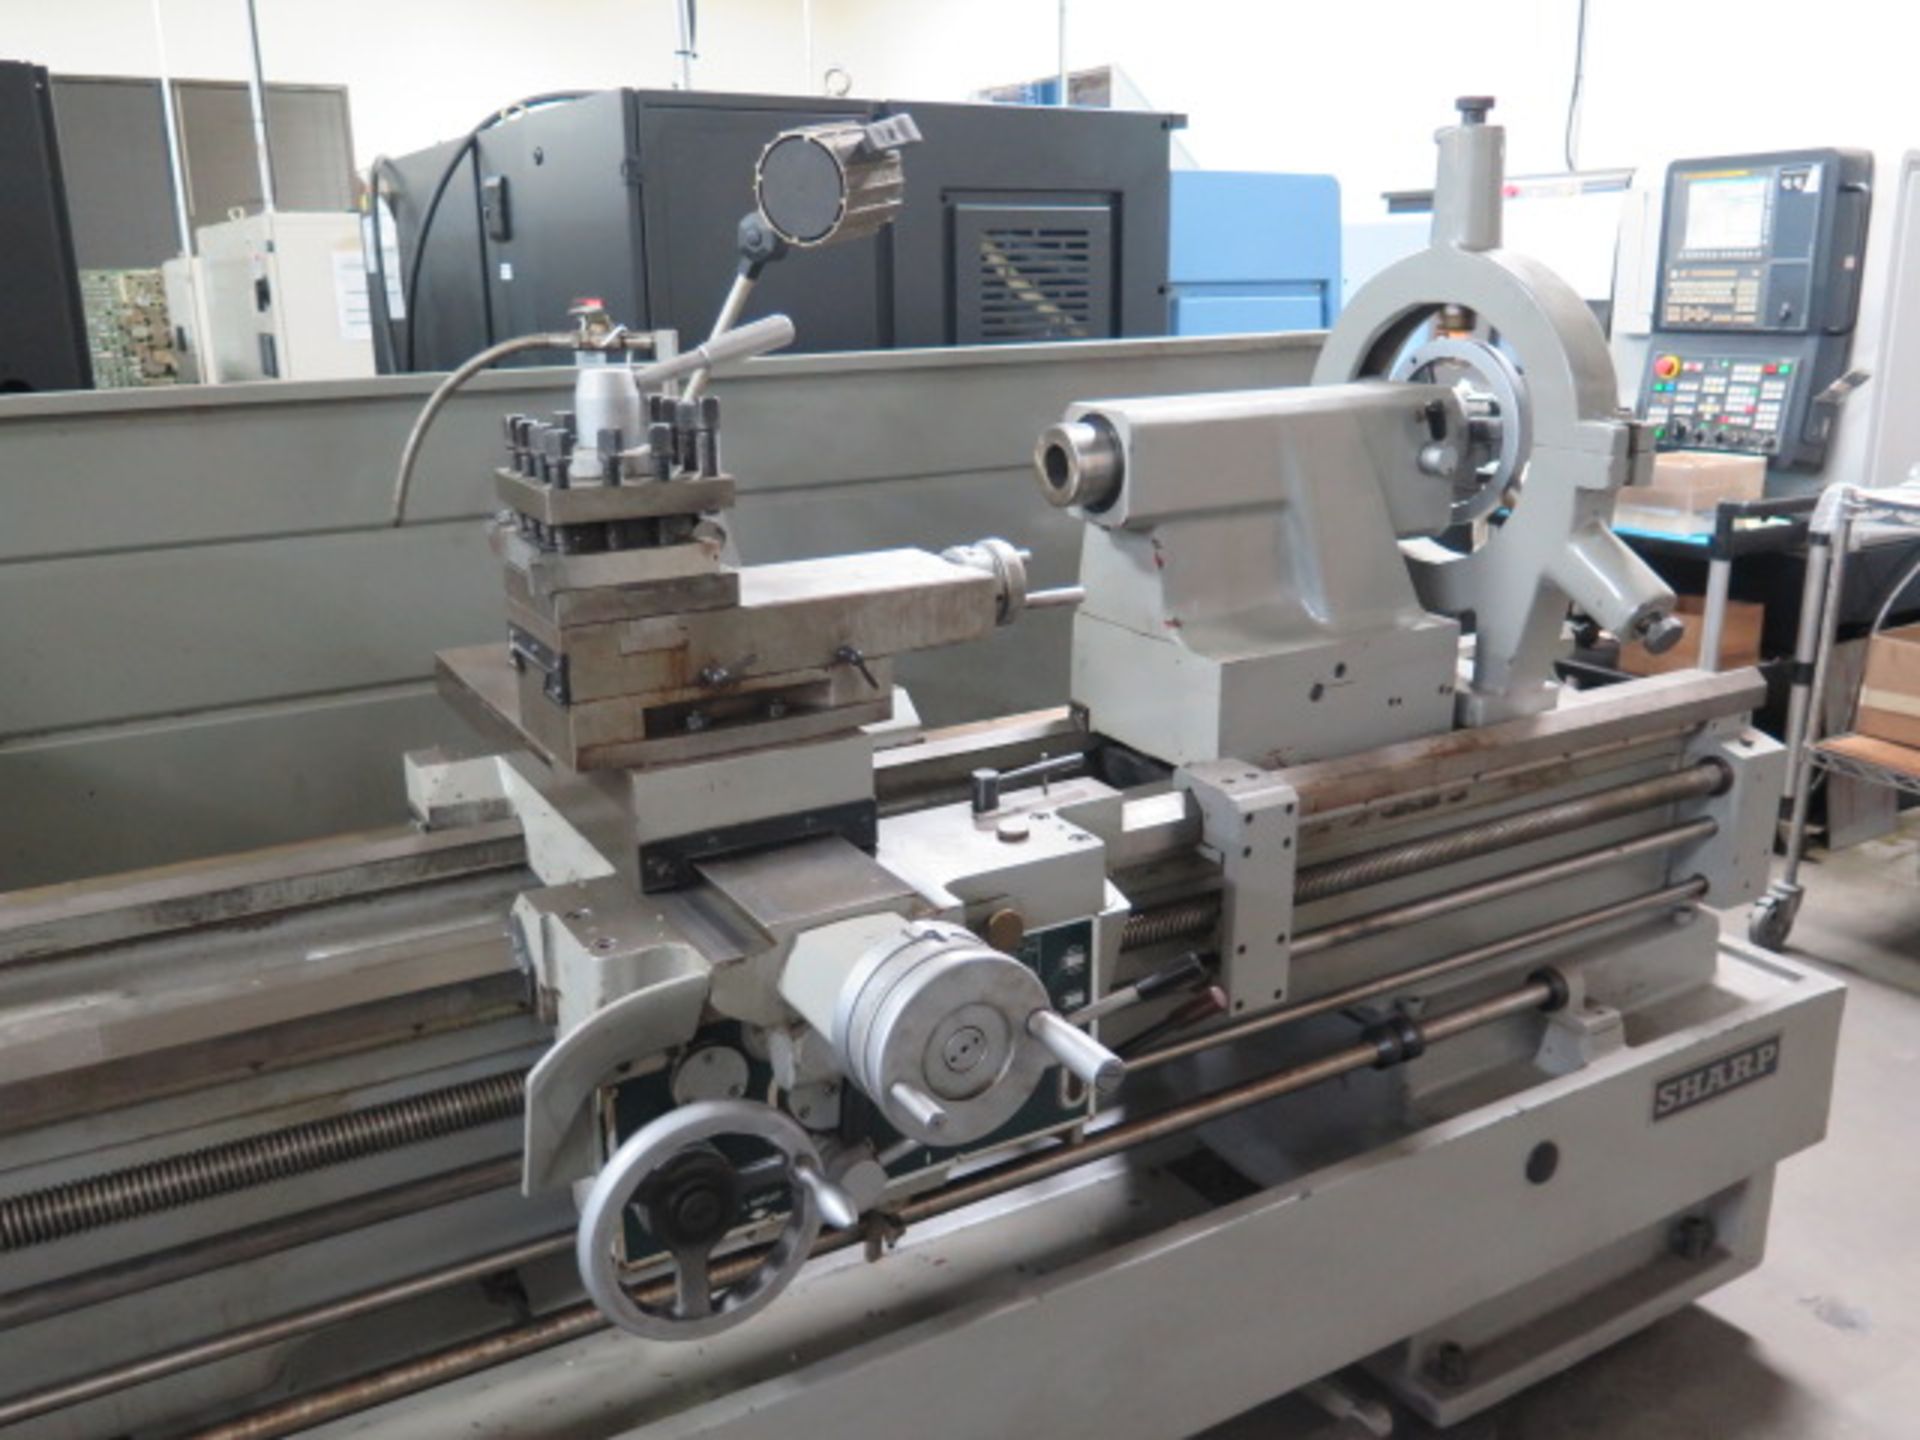 1996 Sharp 2680C 26” x 80” Geared Head – Gap Bed Lathe s/n 4812025 w/ 15-1500 RPM, SOLD AS IS - Image 10 of 17